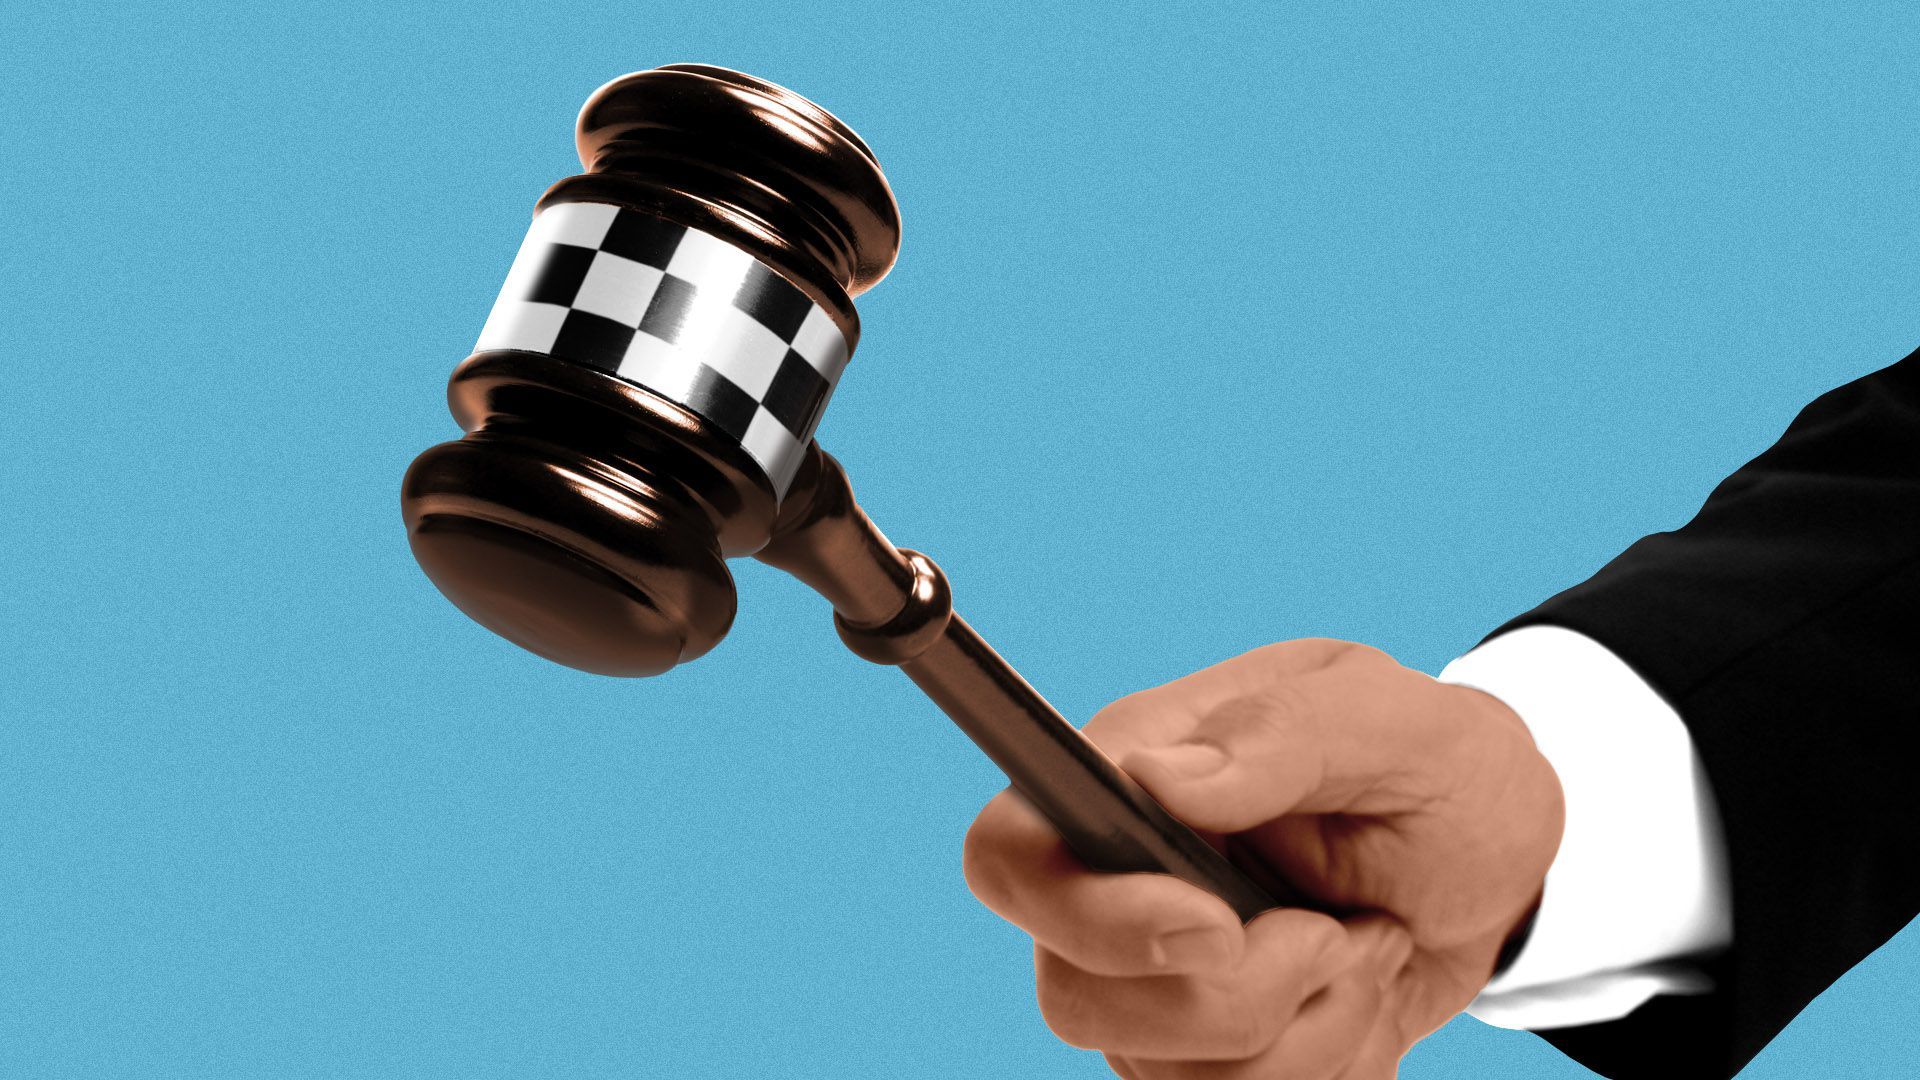 Illustration of a hand holding a gavel with a checker print flag design on it